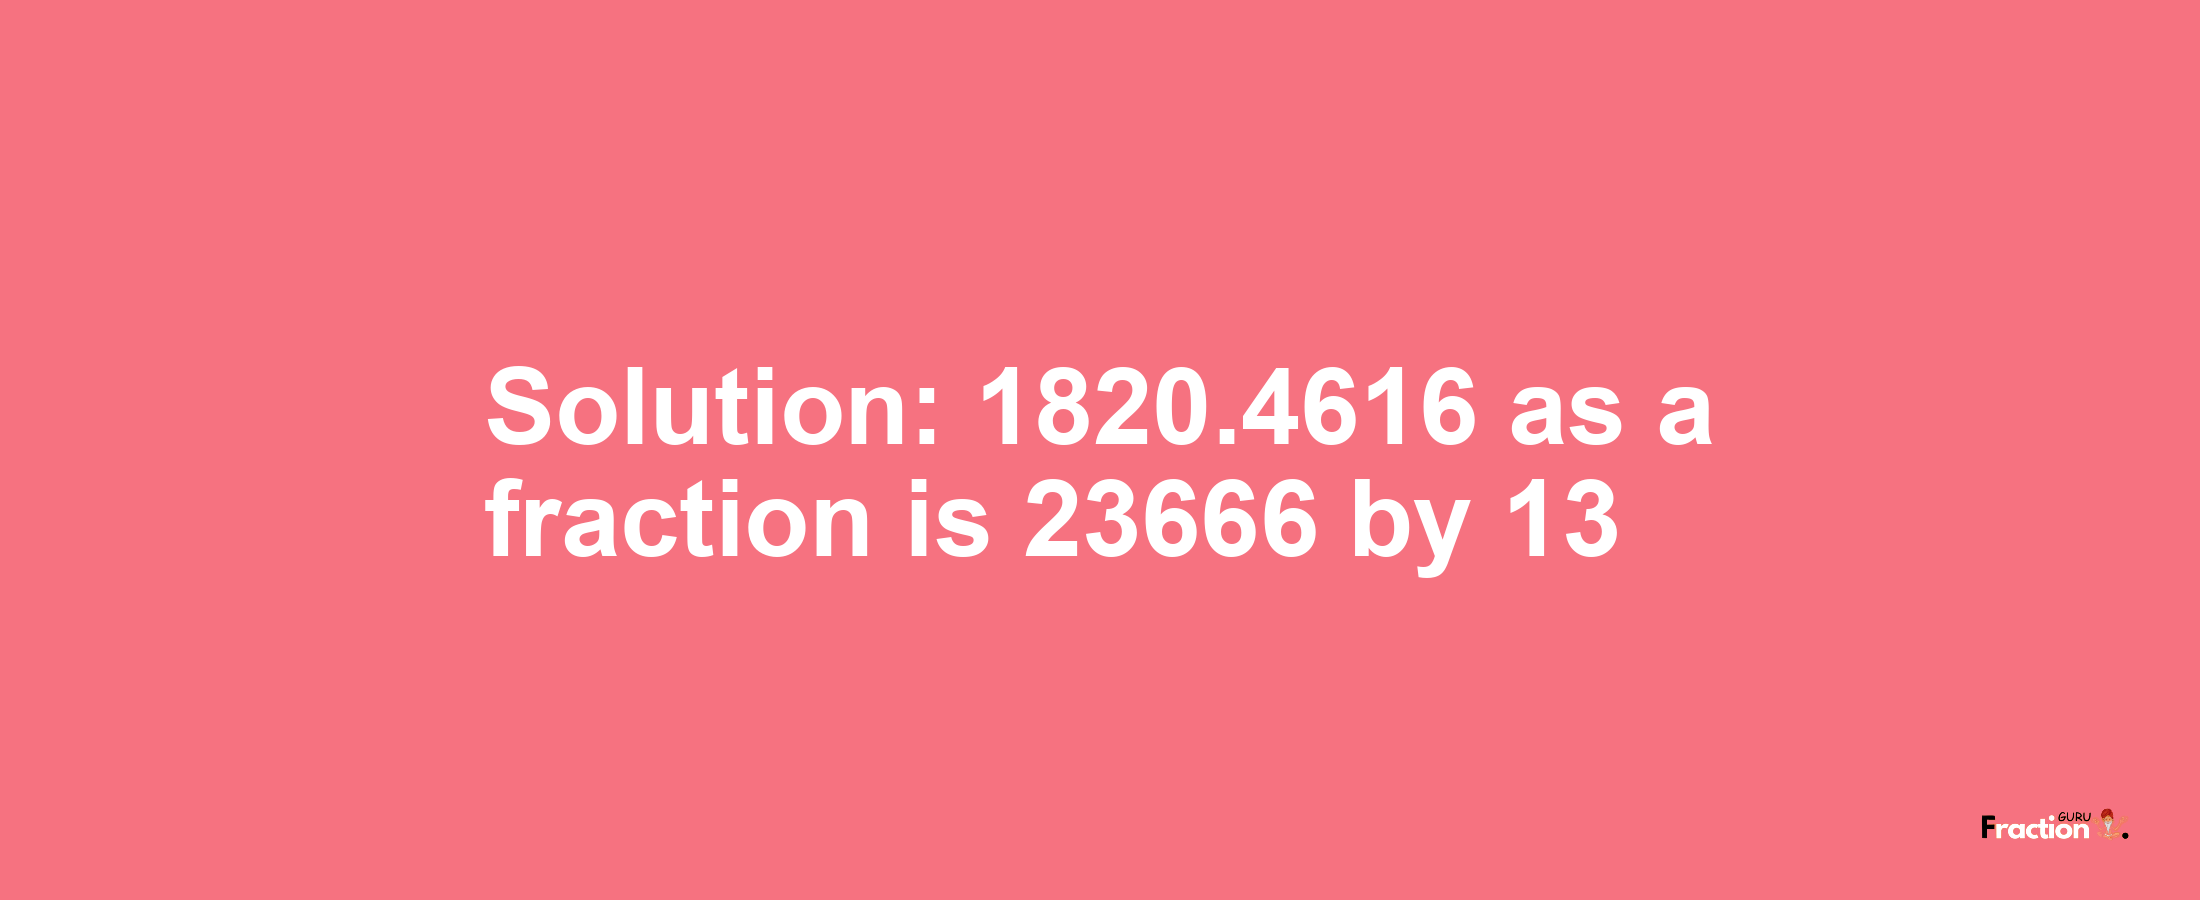 Solution:1820.4616 as a fraction is 23666/13